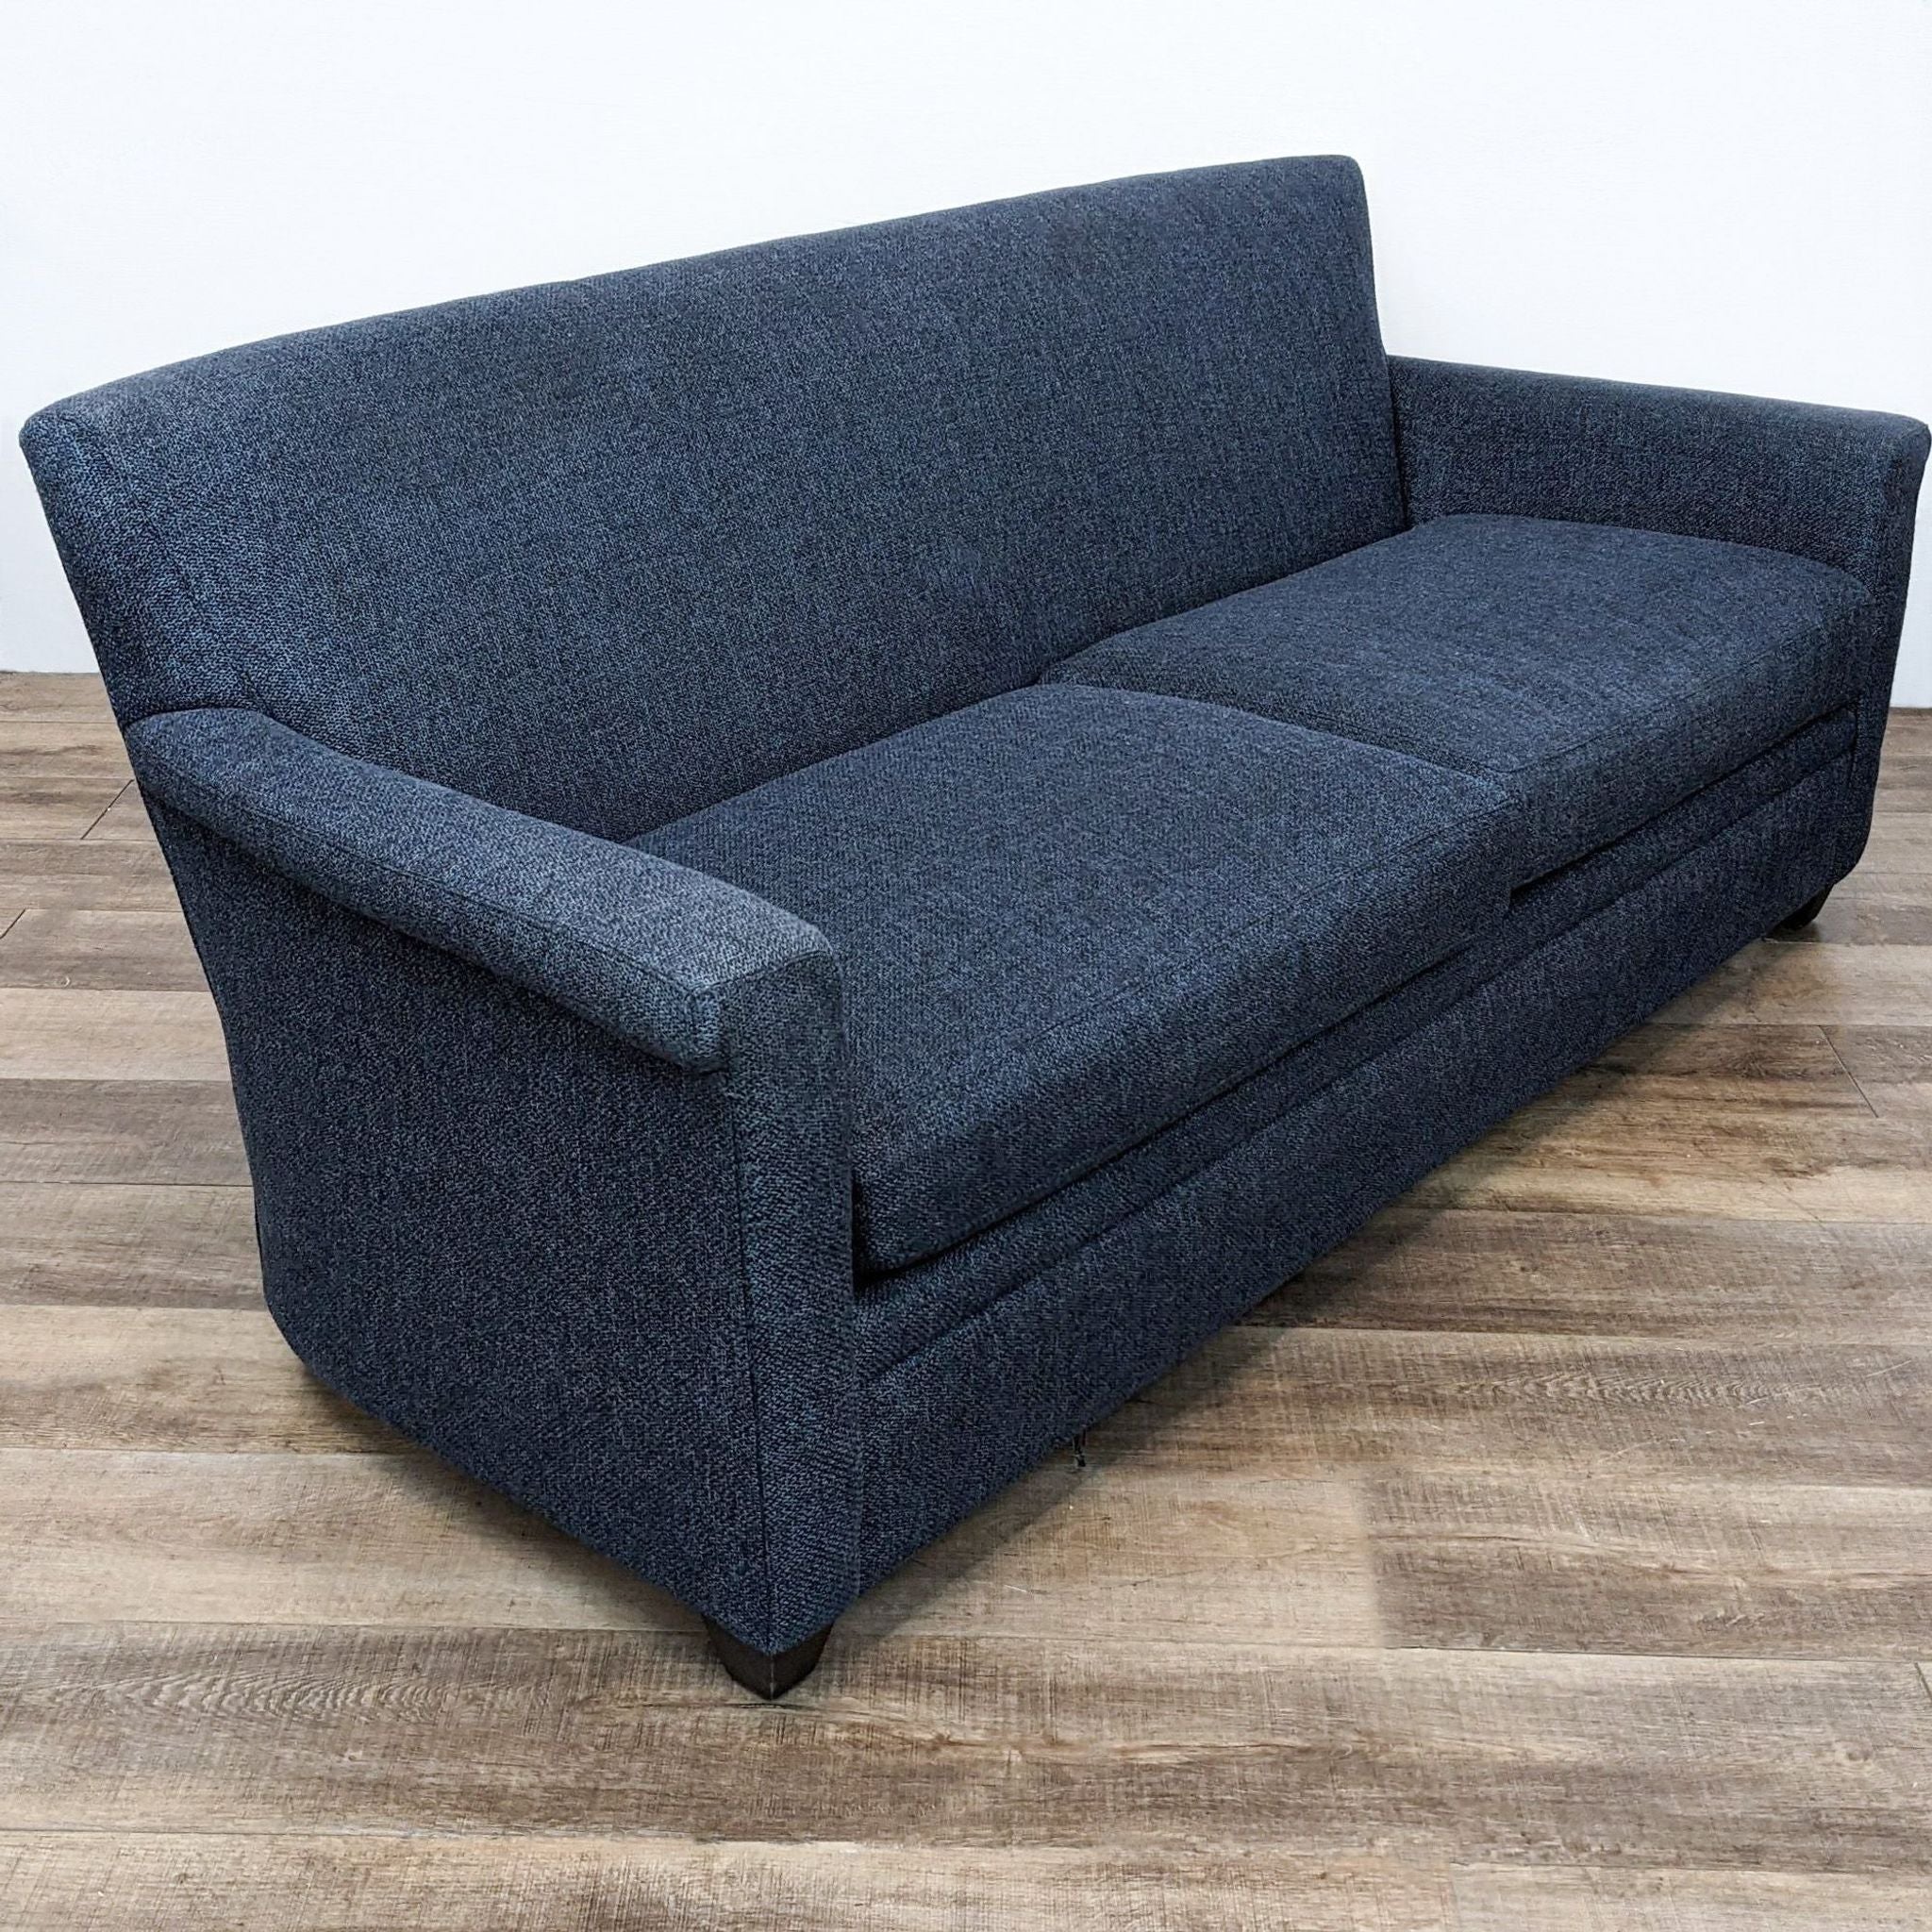 Compact Crate & Barrel dark gray loveseat with curved armrests and elegant dark wooden legs, suitable for small spaces.